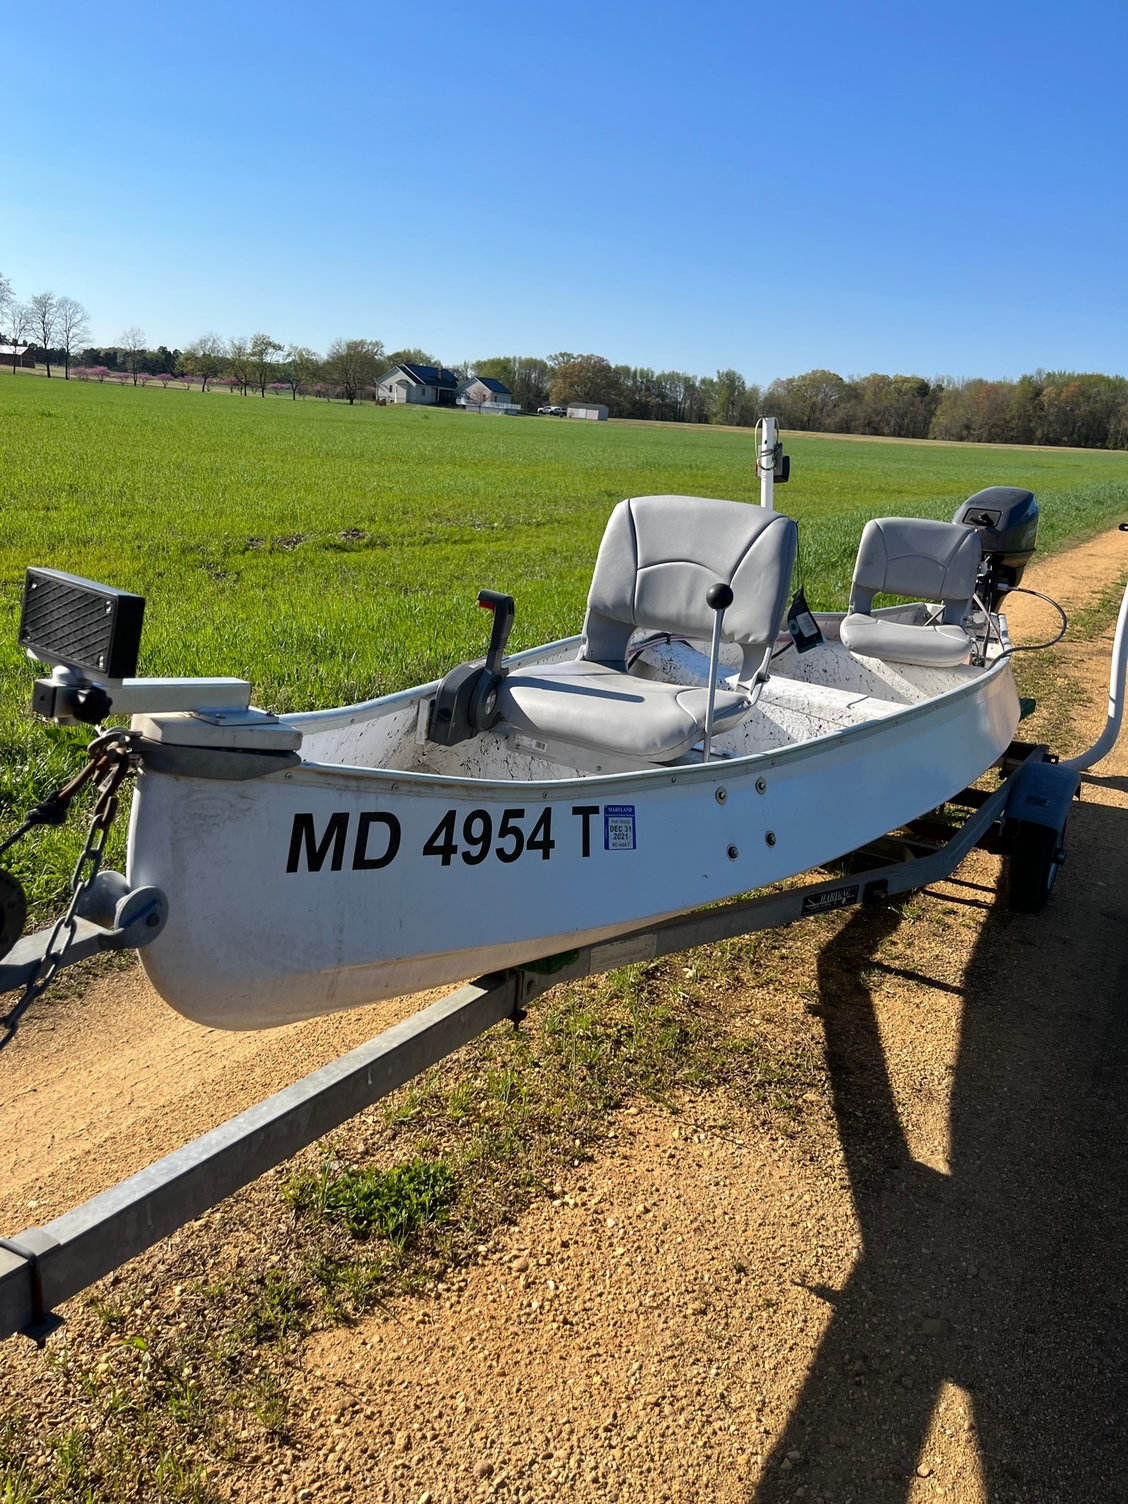 Gheenoe - $2900 - The Hull Truth - Boating and Fishing Forum